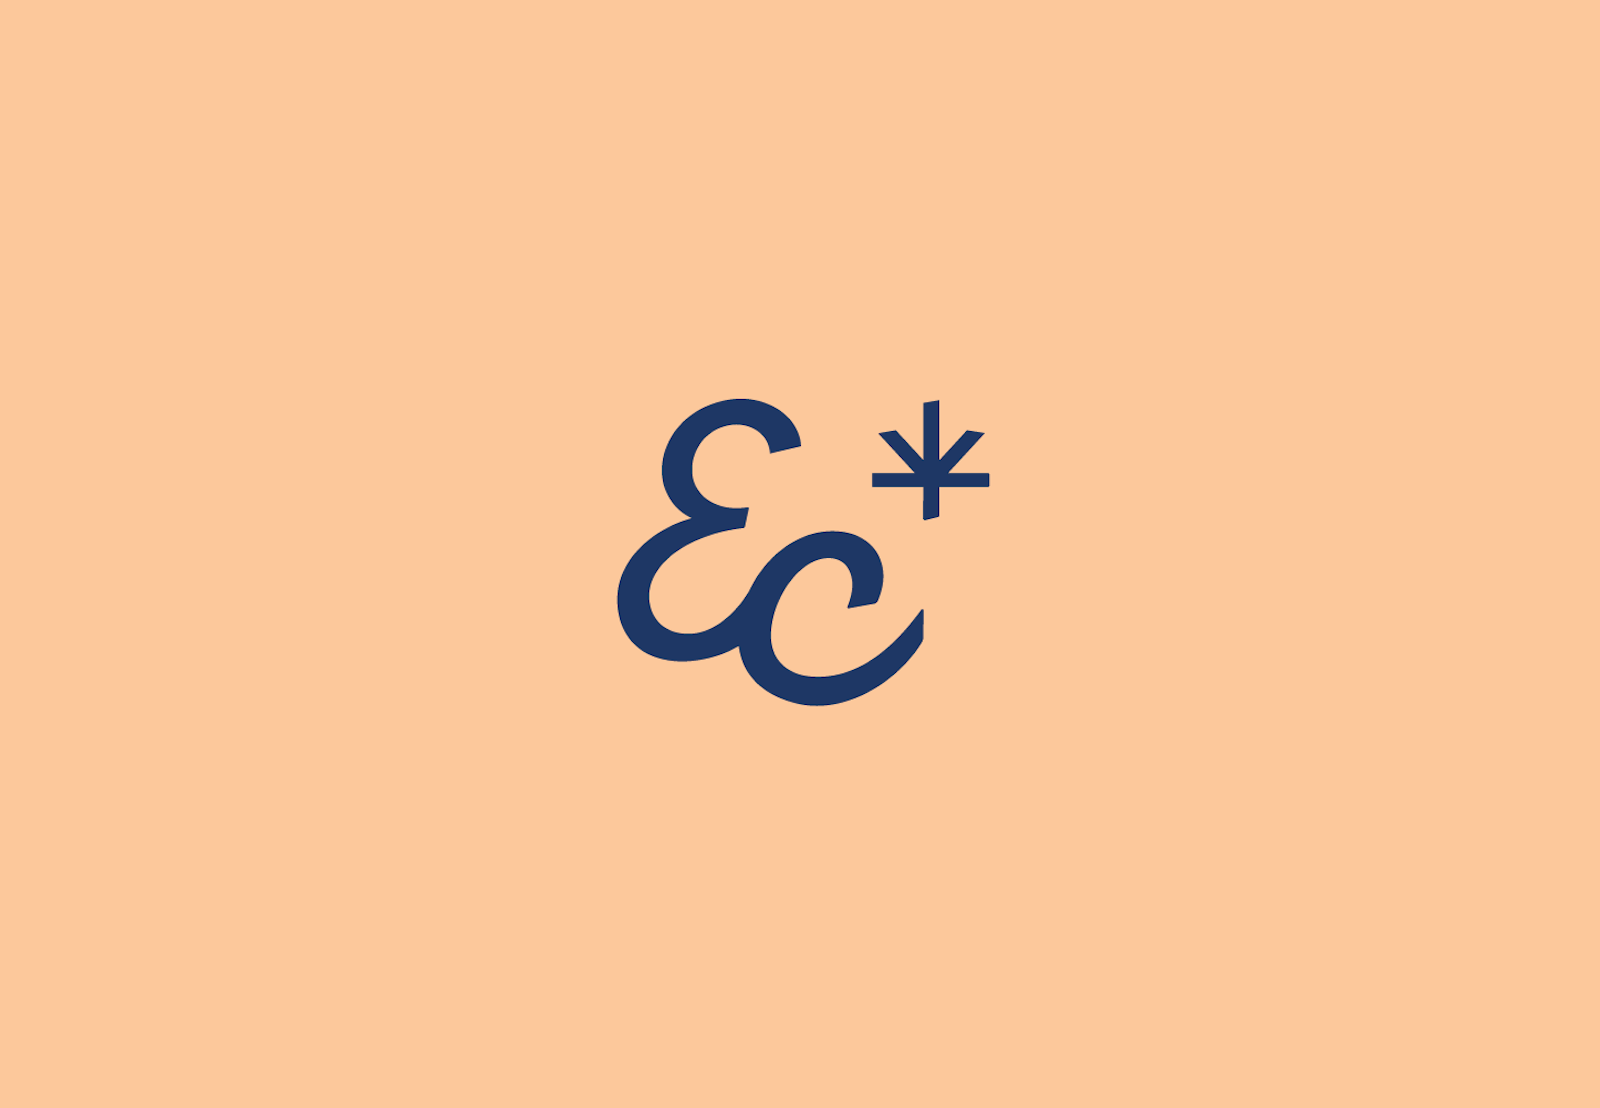 The ec and asterisk short logo design on peach color background.